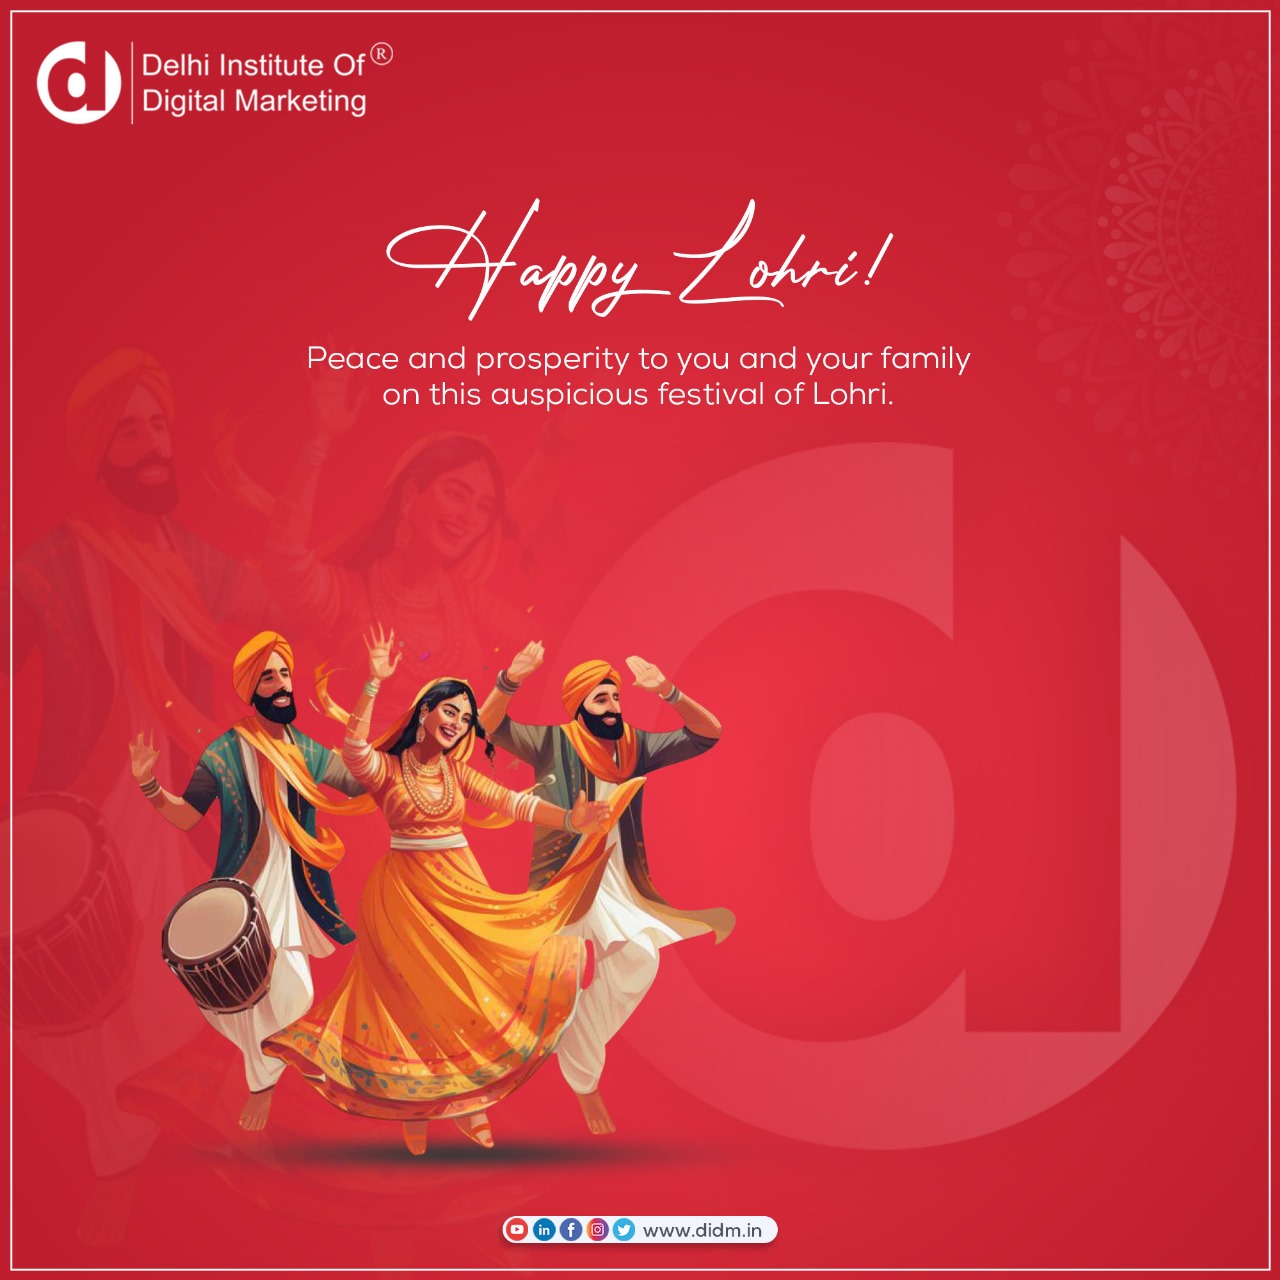 DIDM Wishes You All A Very Happy Lohri